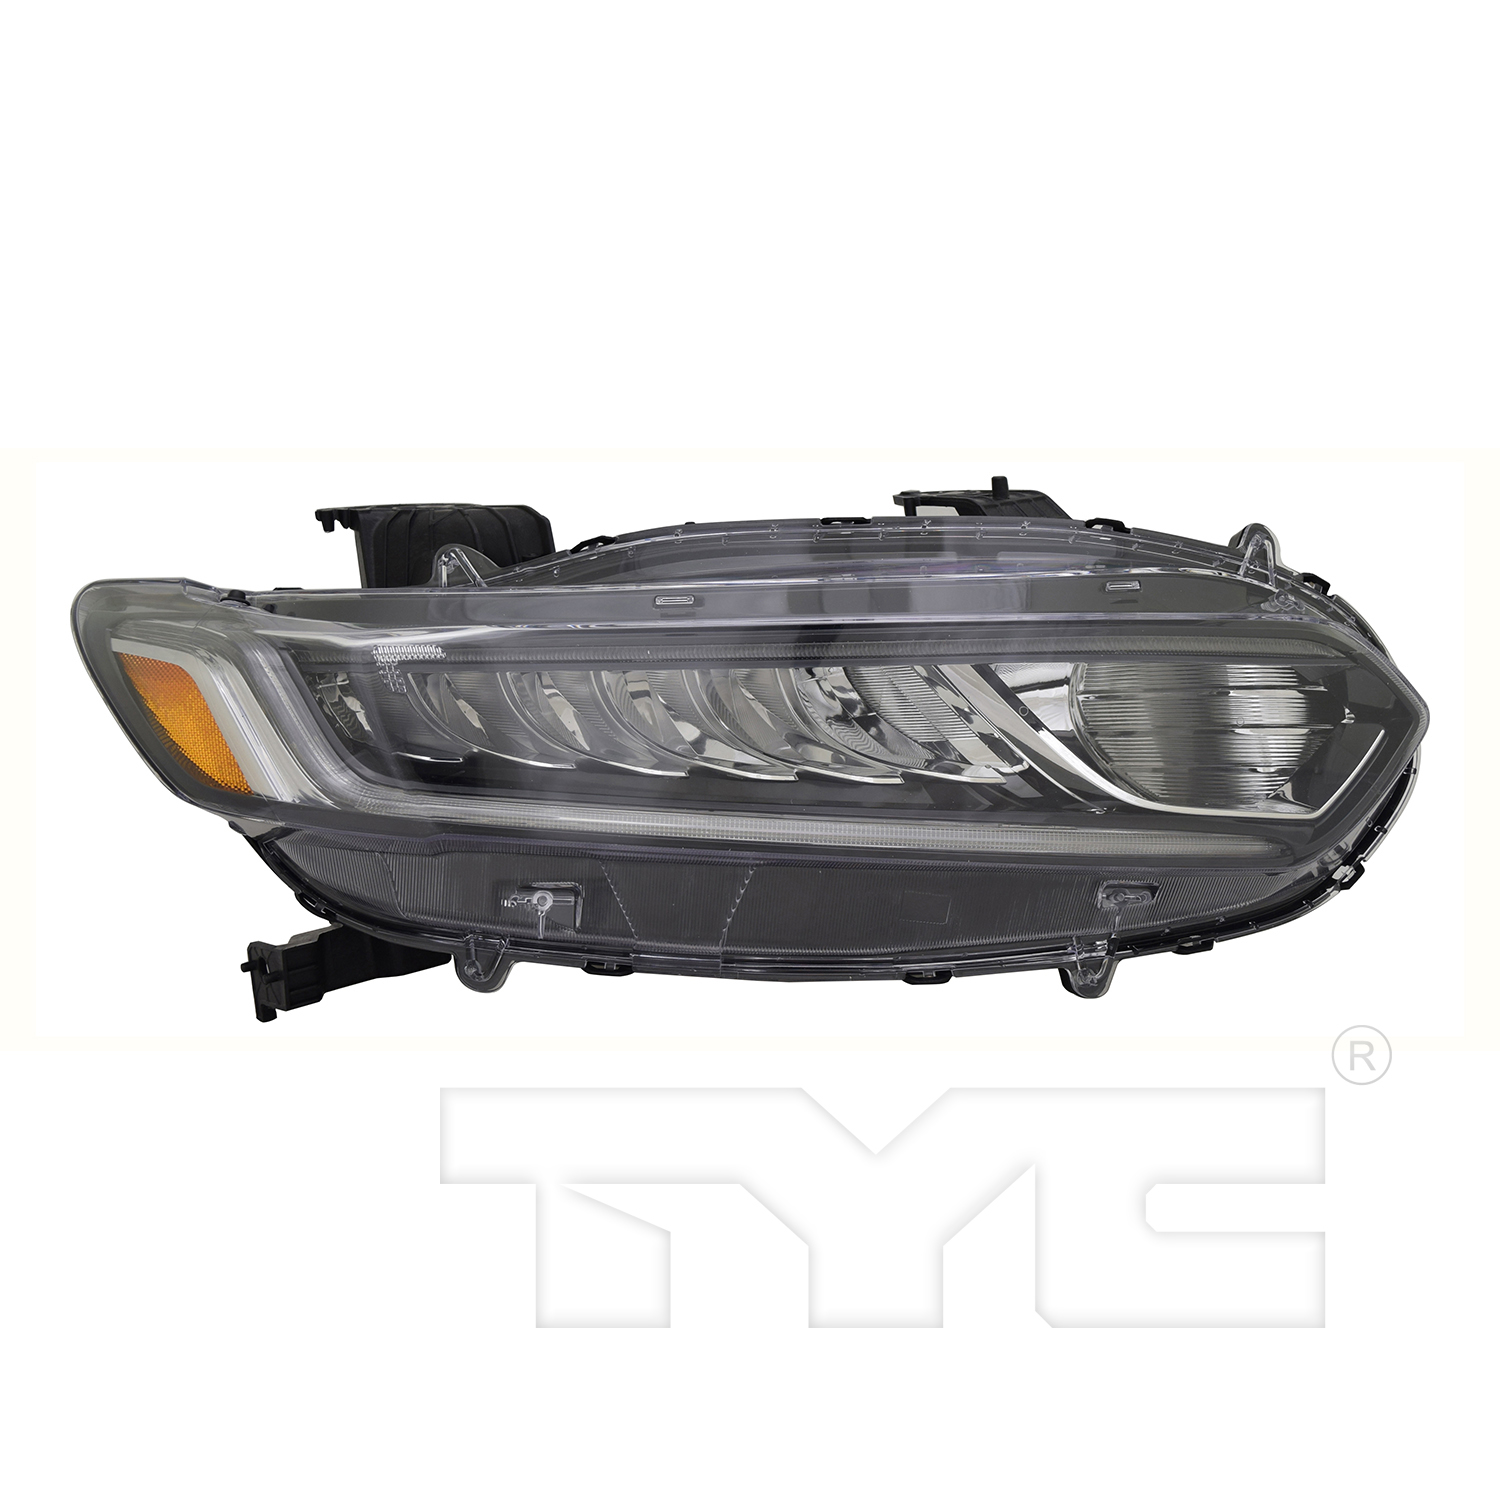 Aftermarket HEADLIGHTS for HONDA - ACCORD, ACCORD,18-22,RT Headlamp assy composite